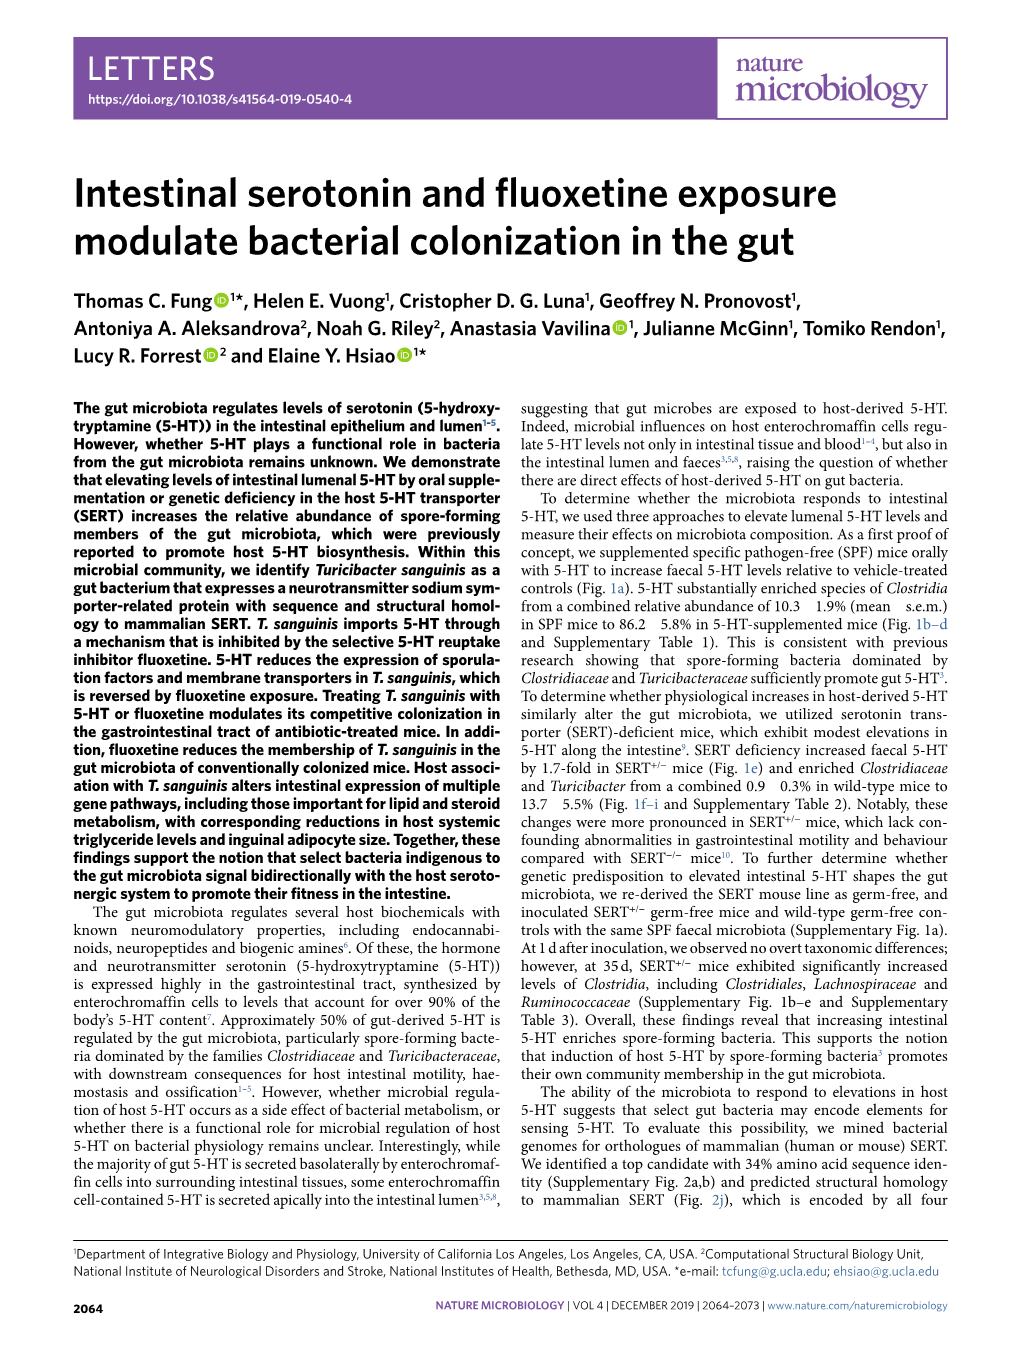 Intestinal Serotonin and Fluoxetine Exposure Modulate Bacterial Colonization in the Gut